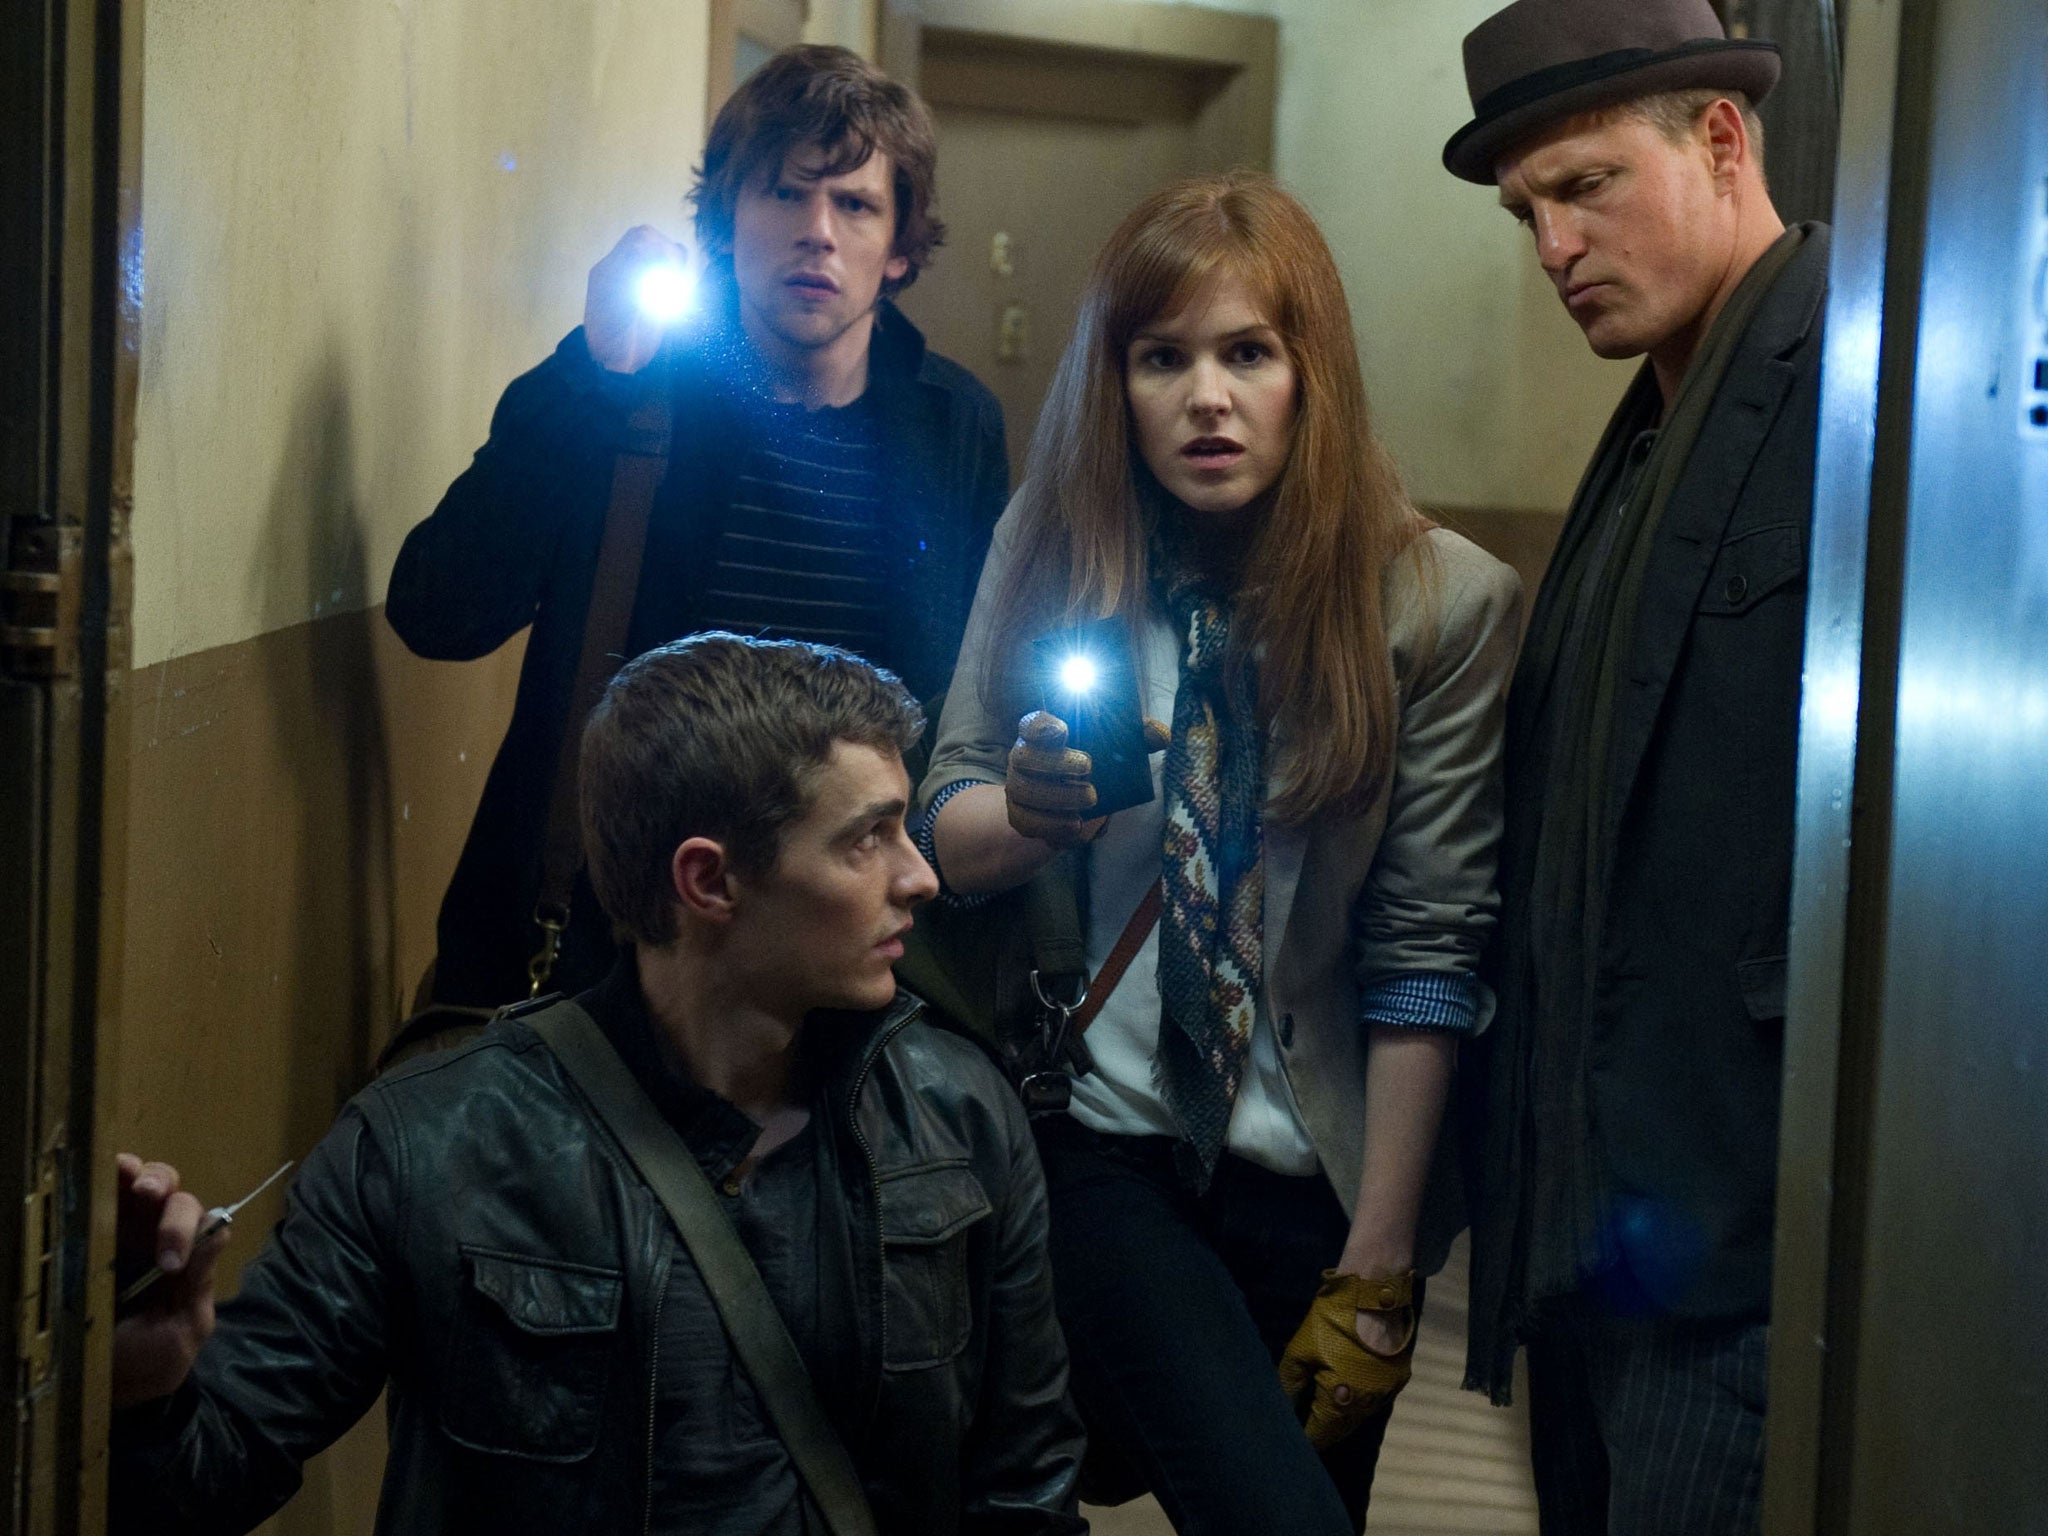 Dave Franco, Jesse Eisenberg, Isla Fisher and Woody Harrelson in a scene from 'Now You See Me'